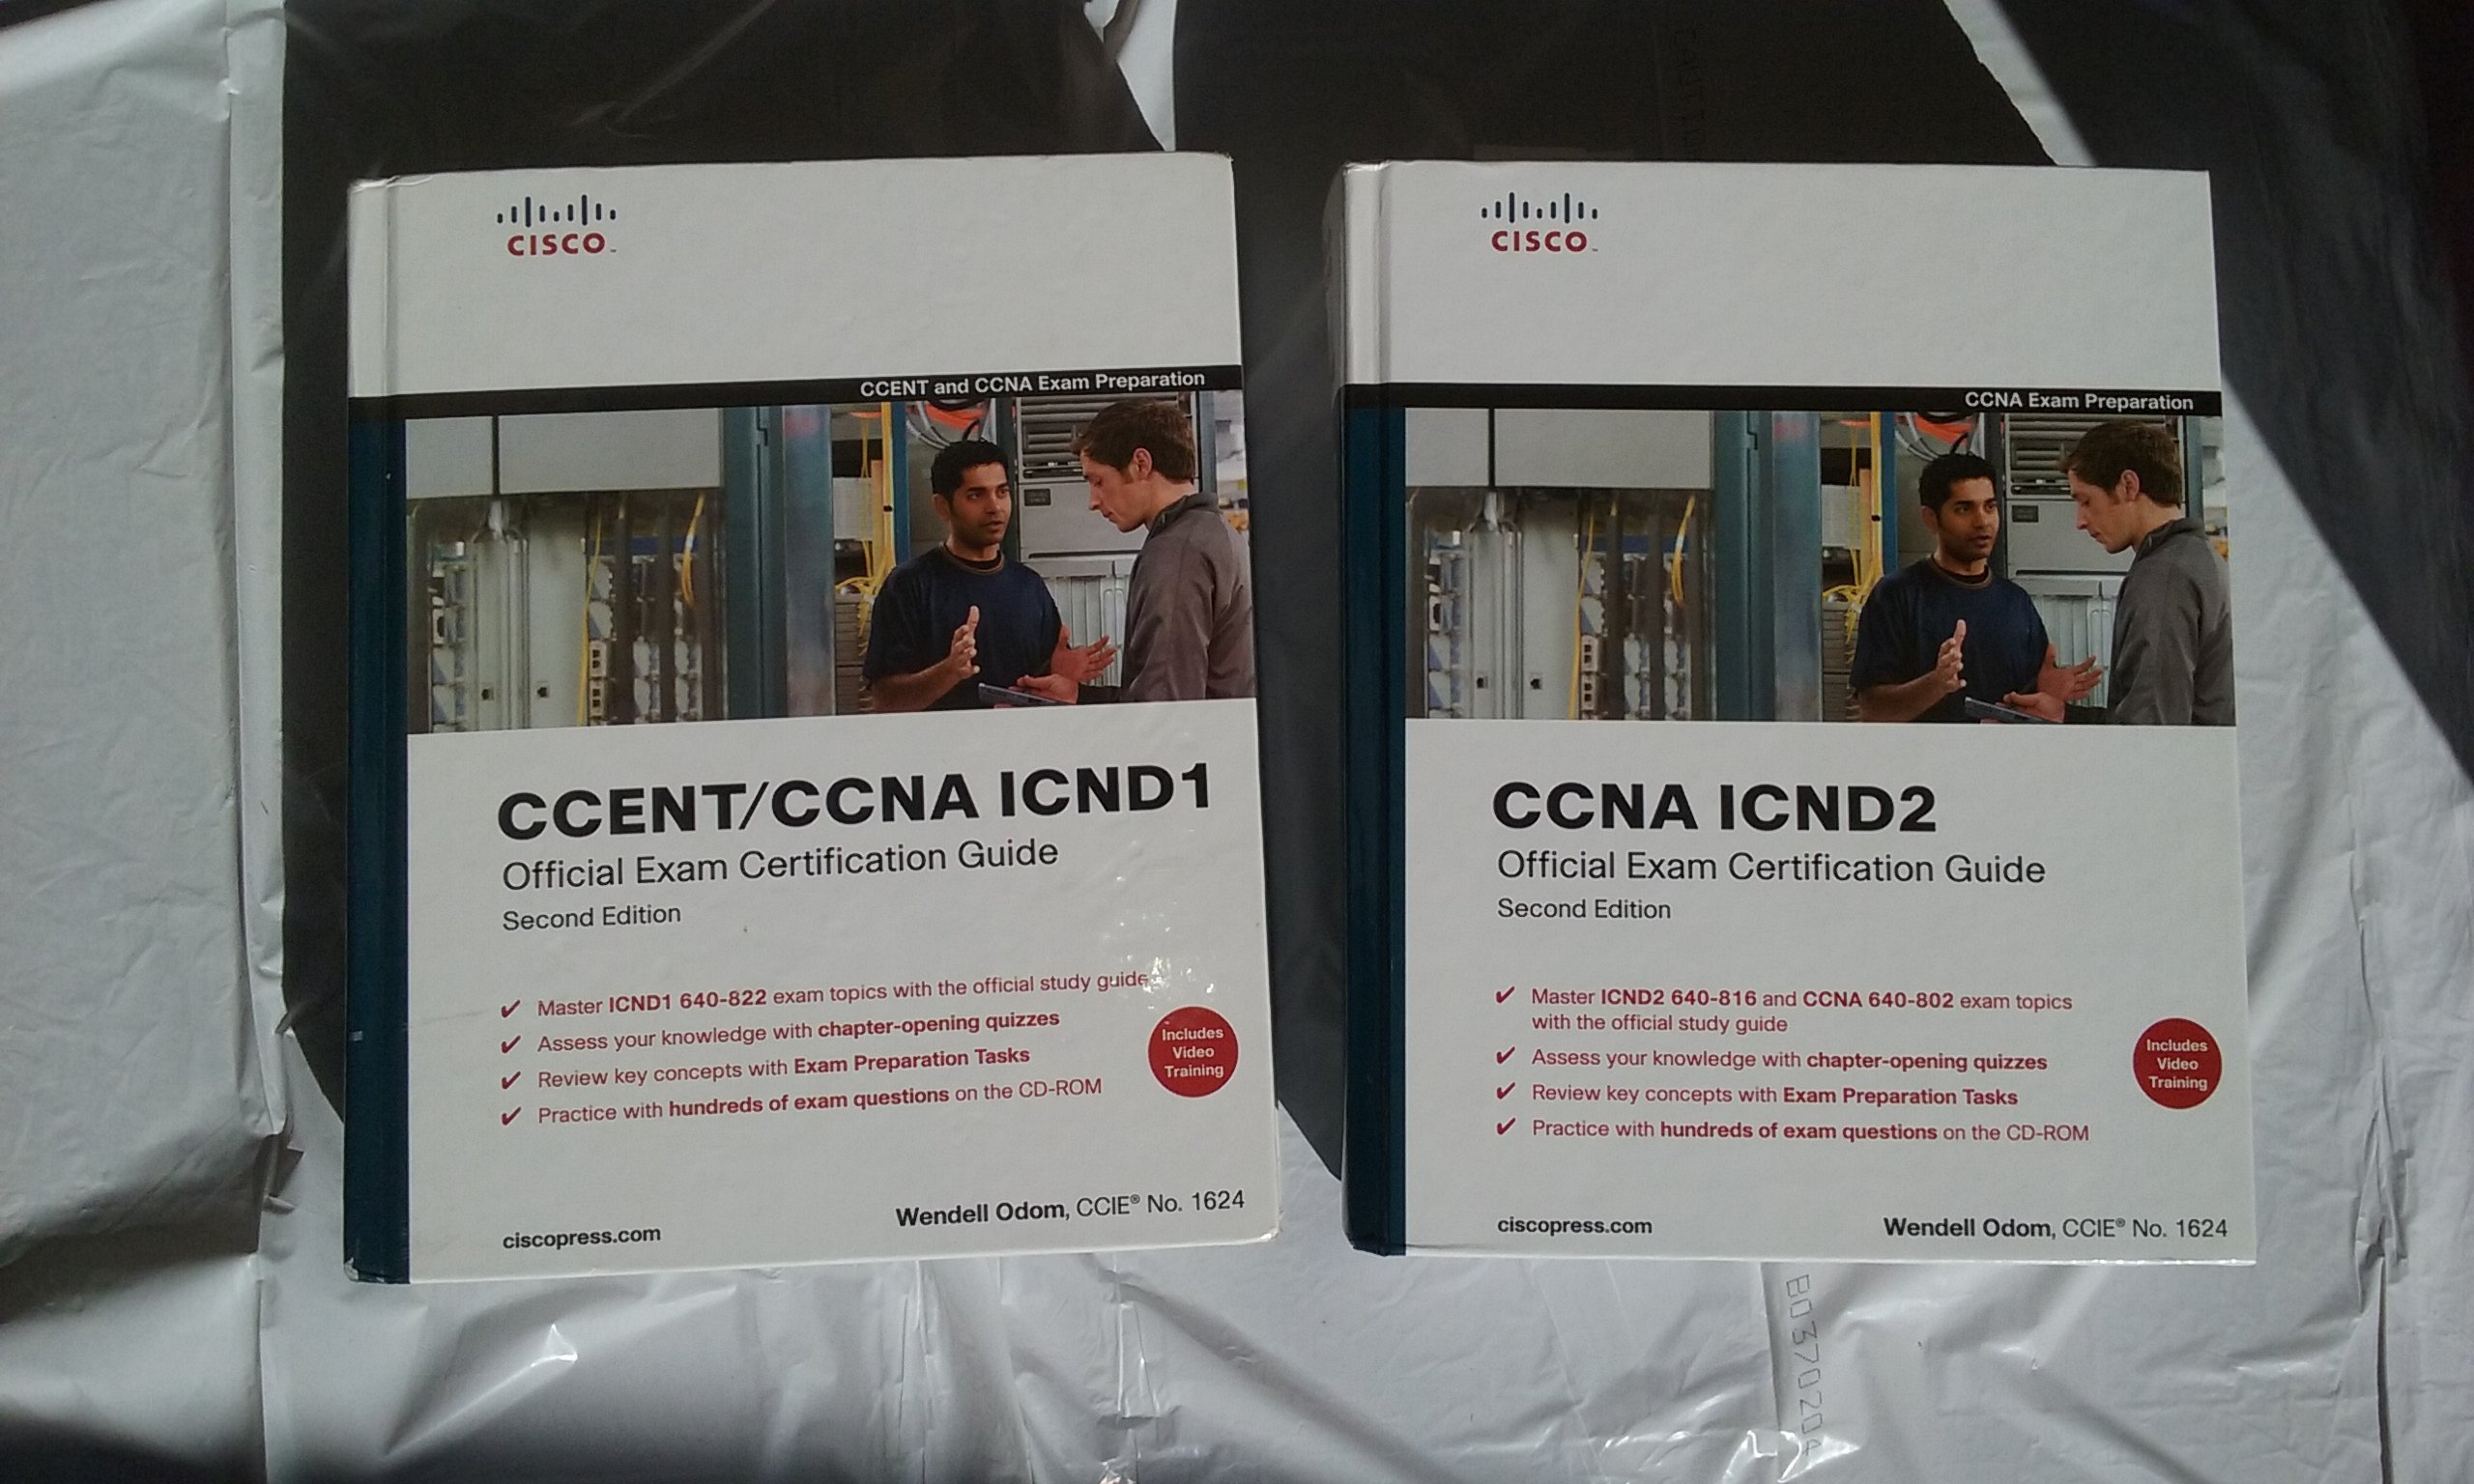 CCNA ICND2 Official Exam Certification Guide: CCNA Exams 640-816 and 640-802